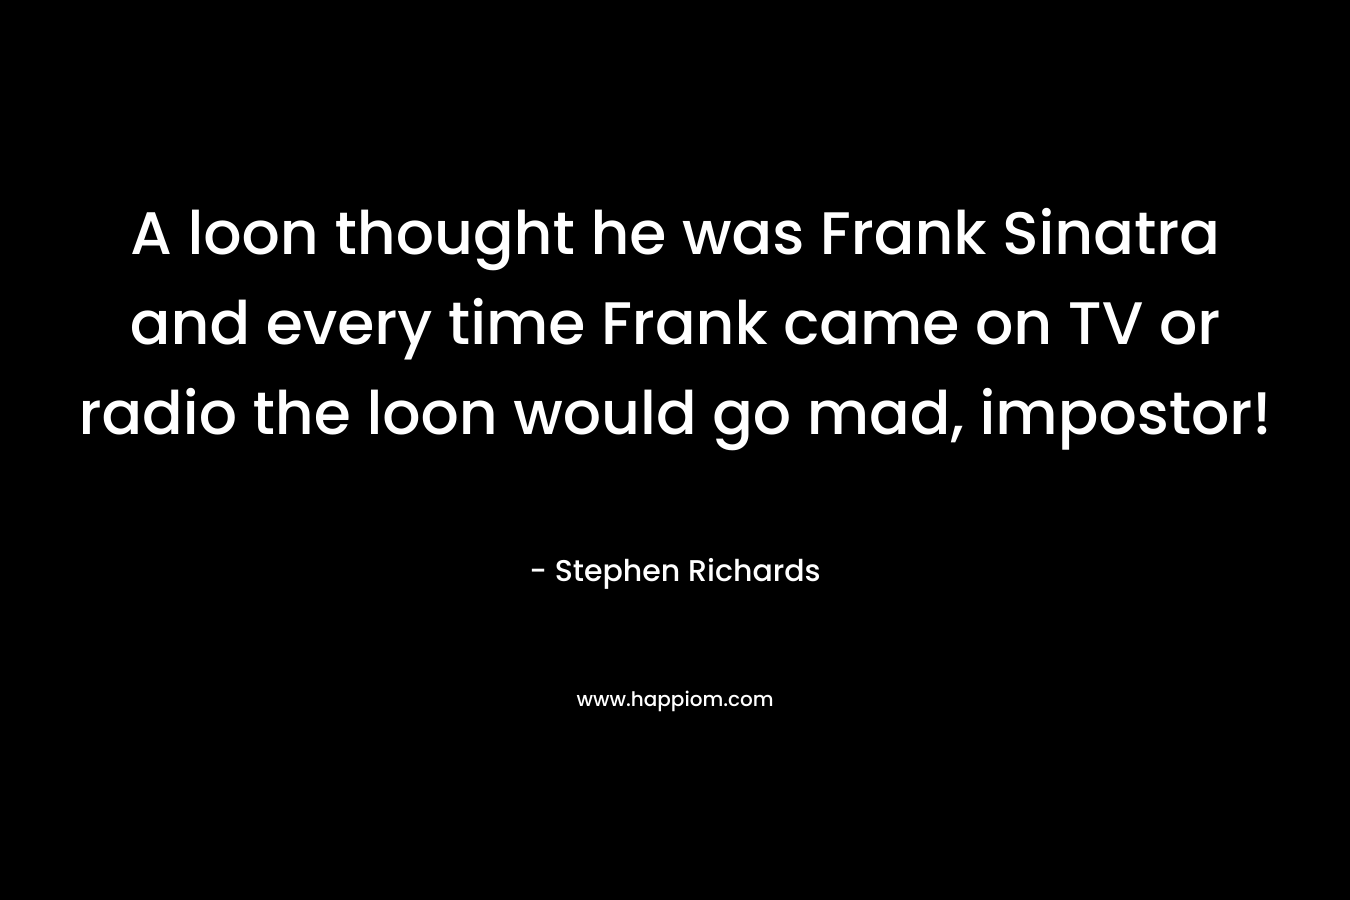 A loon thought he was Frank Sinatra and every time Frank came on TV or radio the loon would go mad, impostor! – Stephen Richards